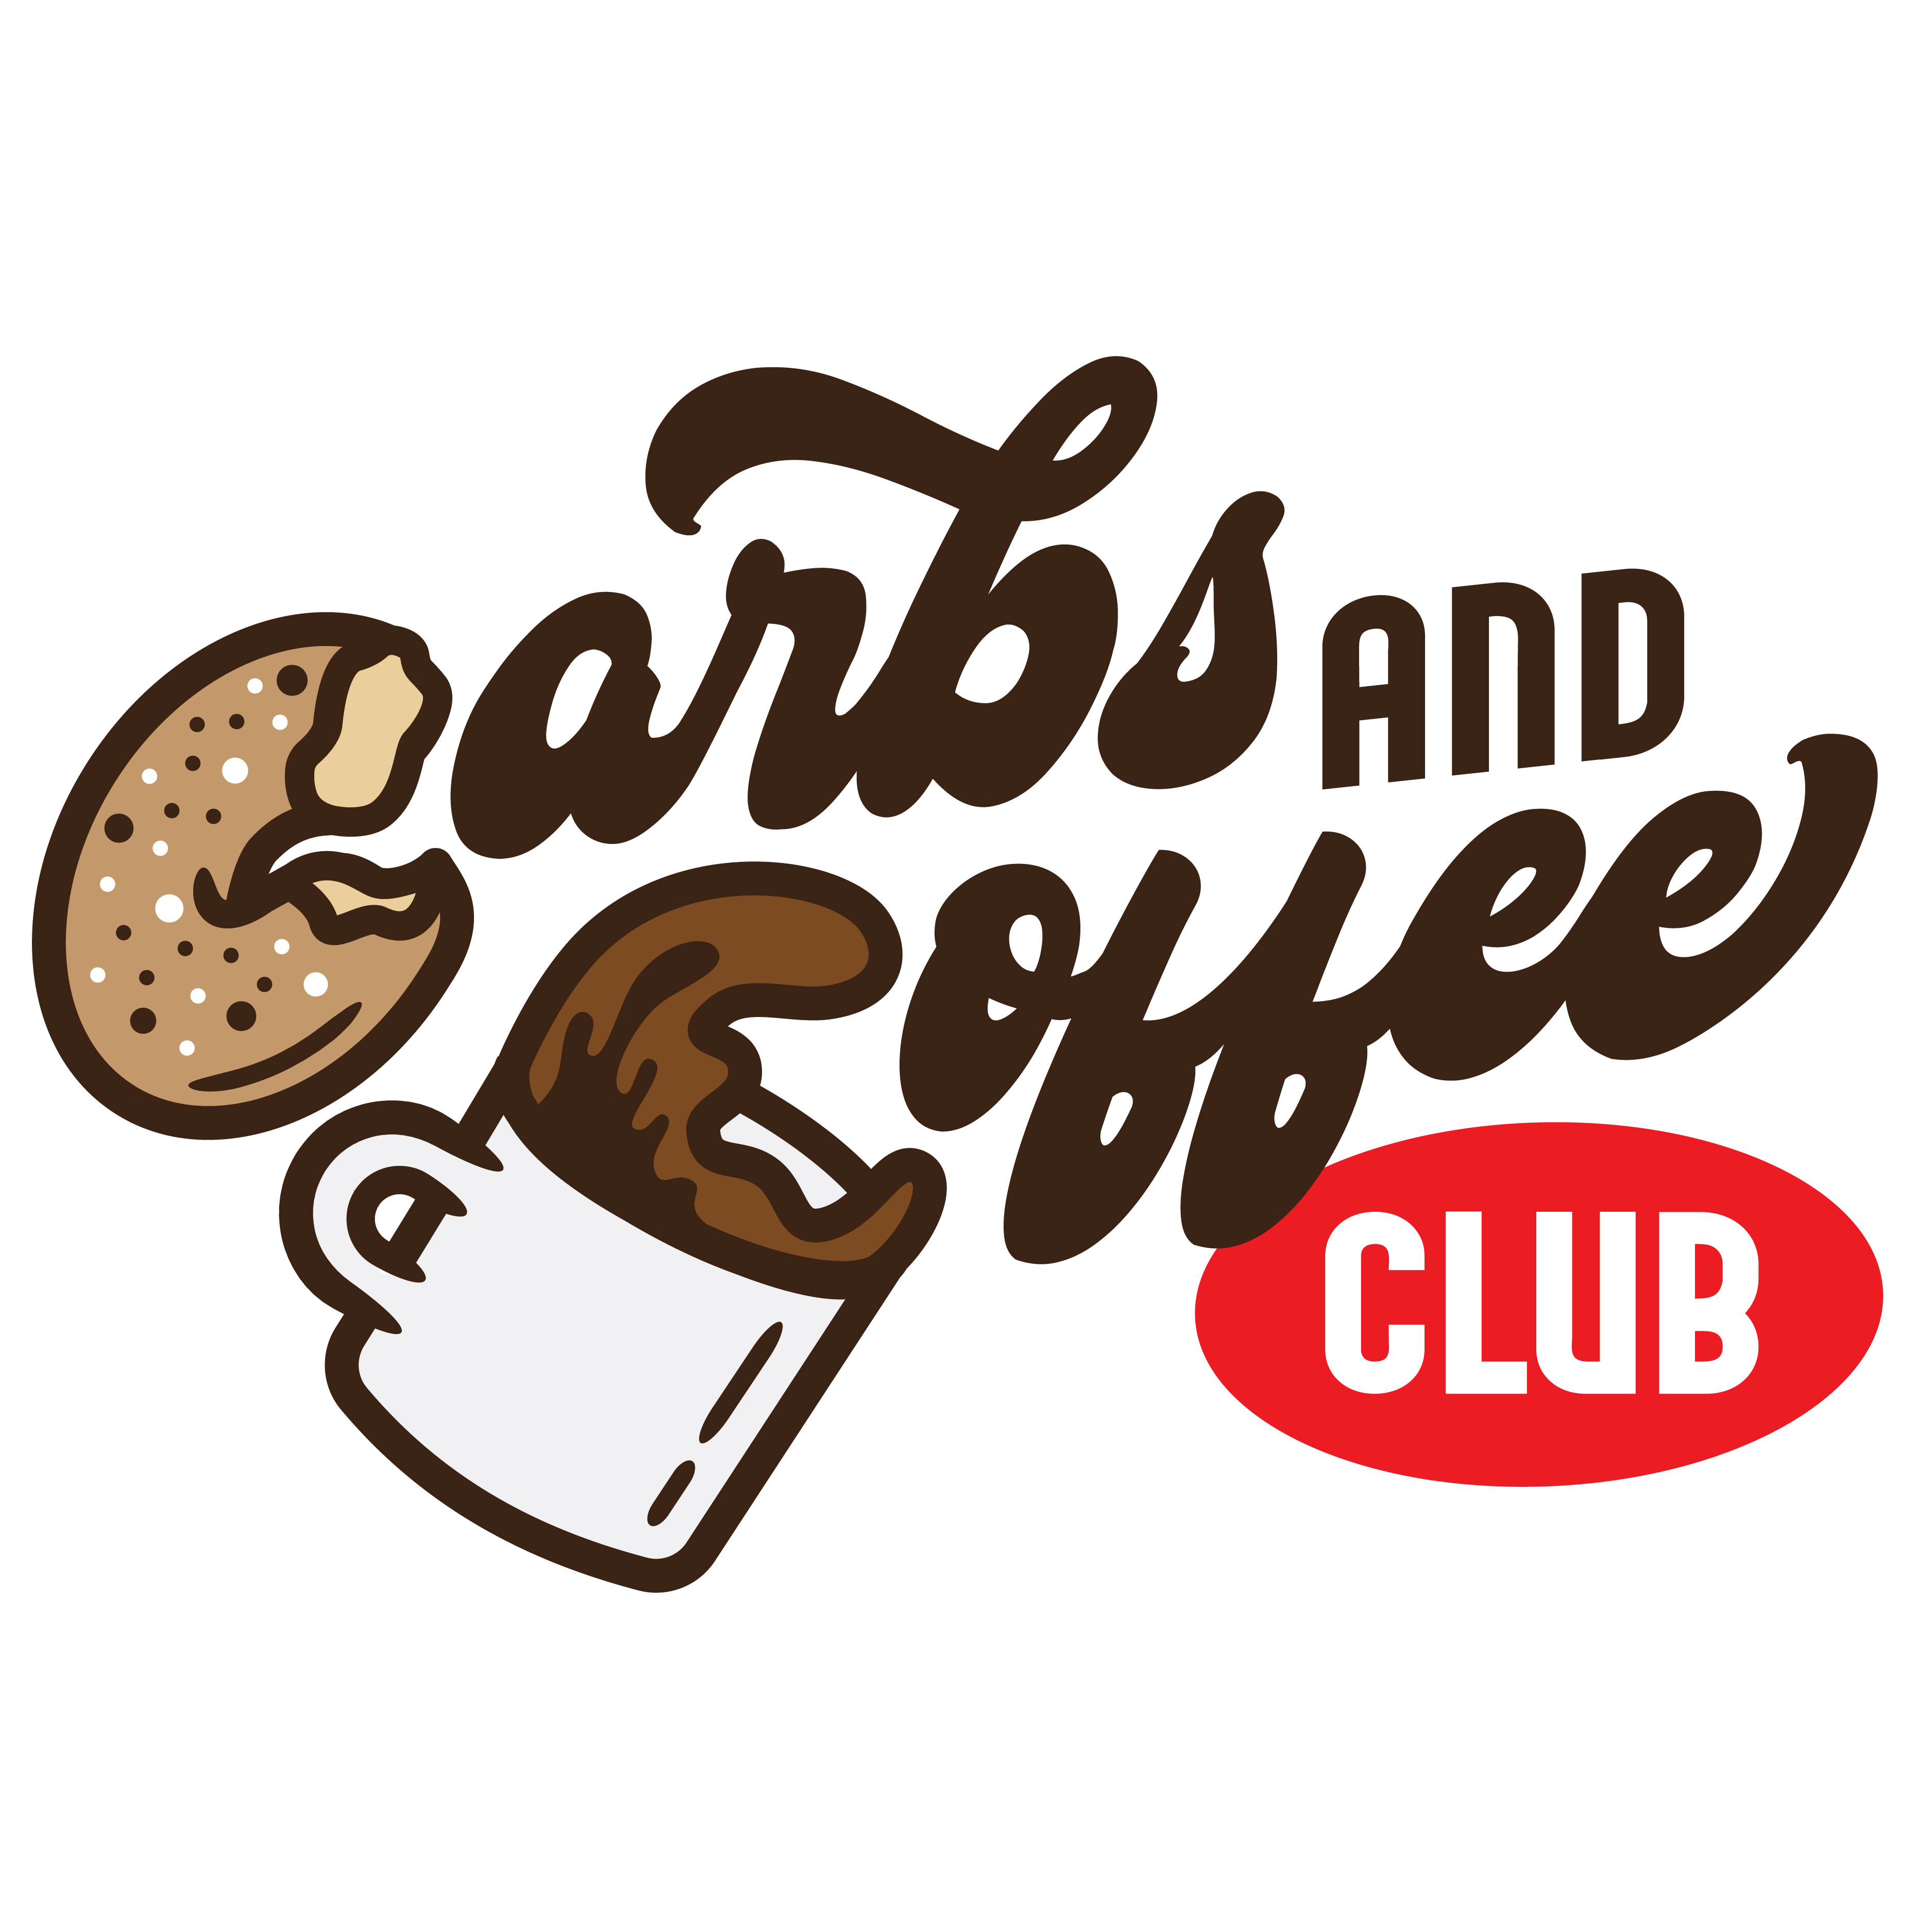 Carbs And Coffee Club Logo logo design by logo designer Stefanie Passo for your inspiration and for the worlds largest logo competition